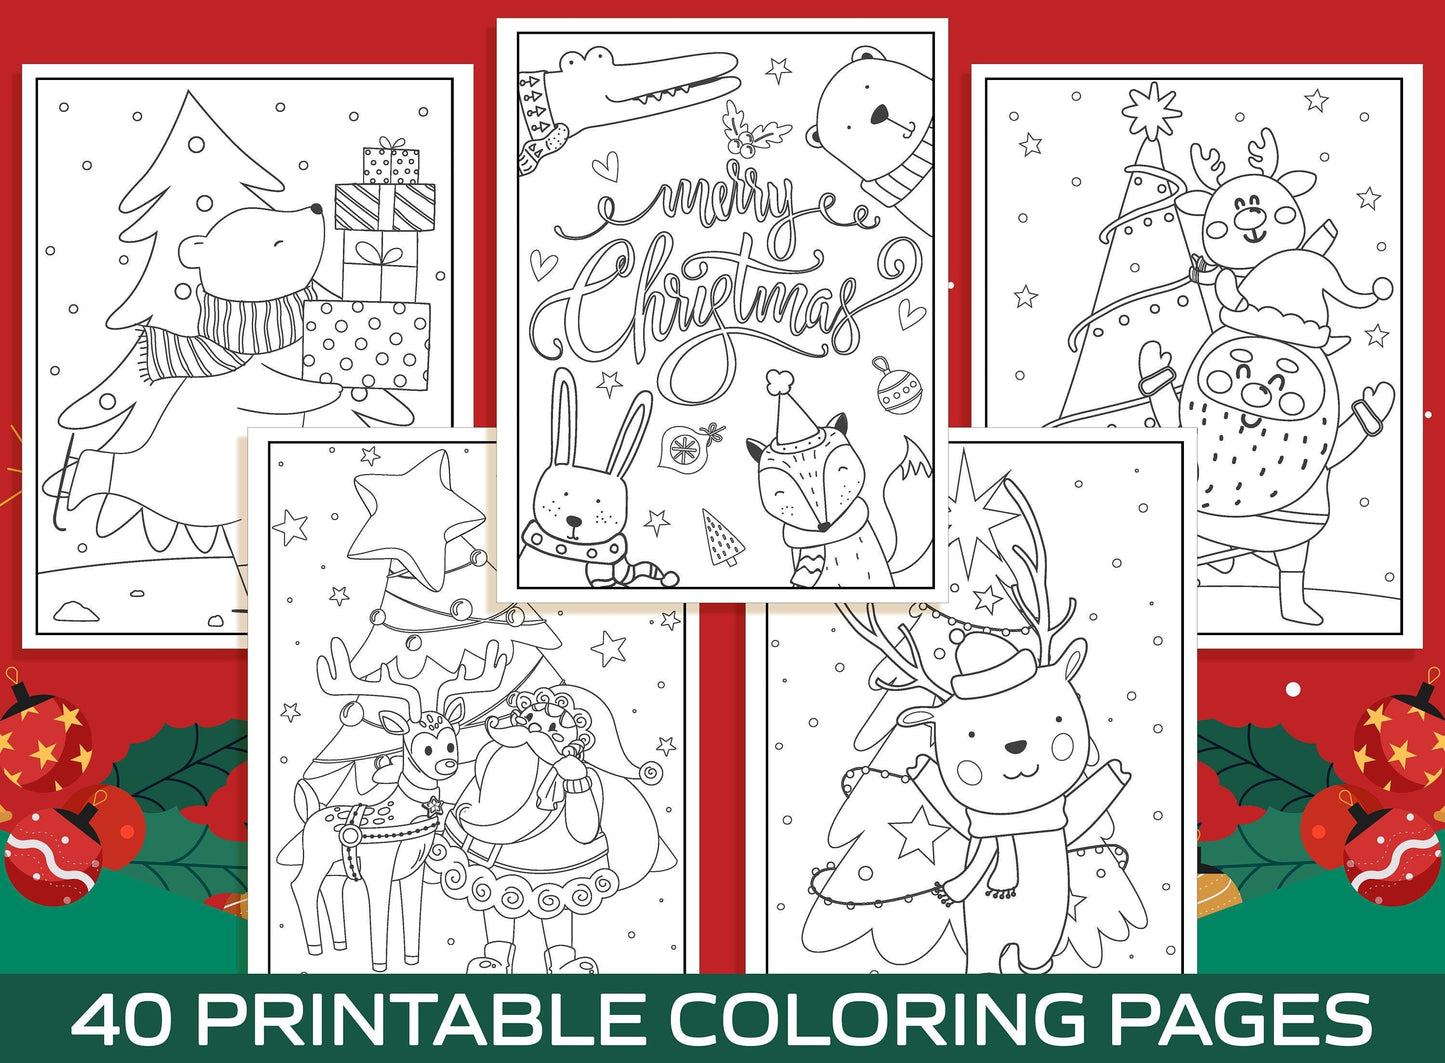 Christmas Coloring Pages - 40 Printable Christmas Coloring Pages for Kids, Boys, Girls, Teens. Christmas Party Activity, Christmas Gift.